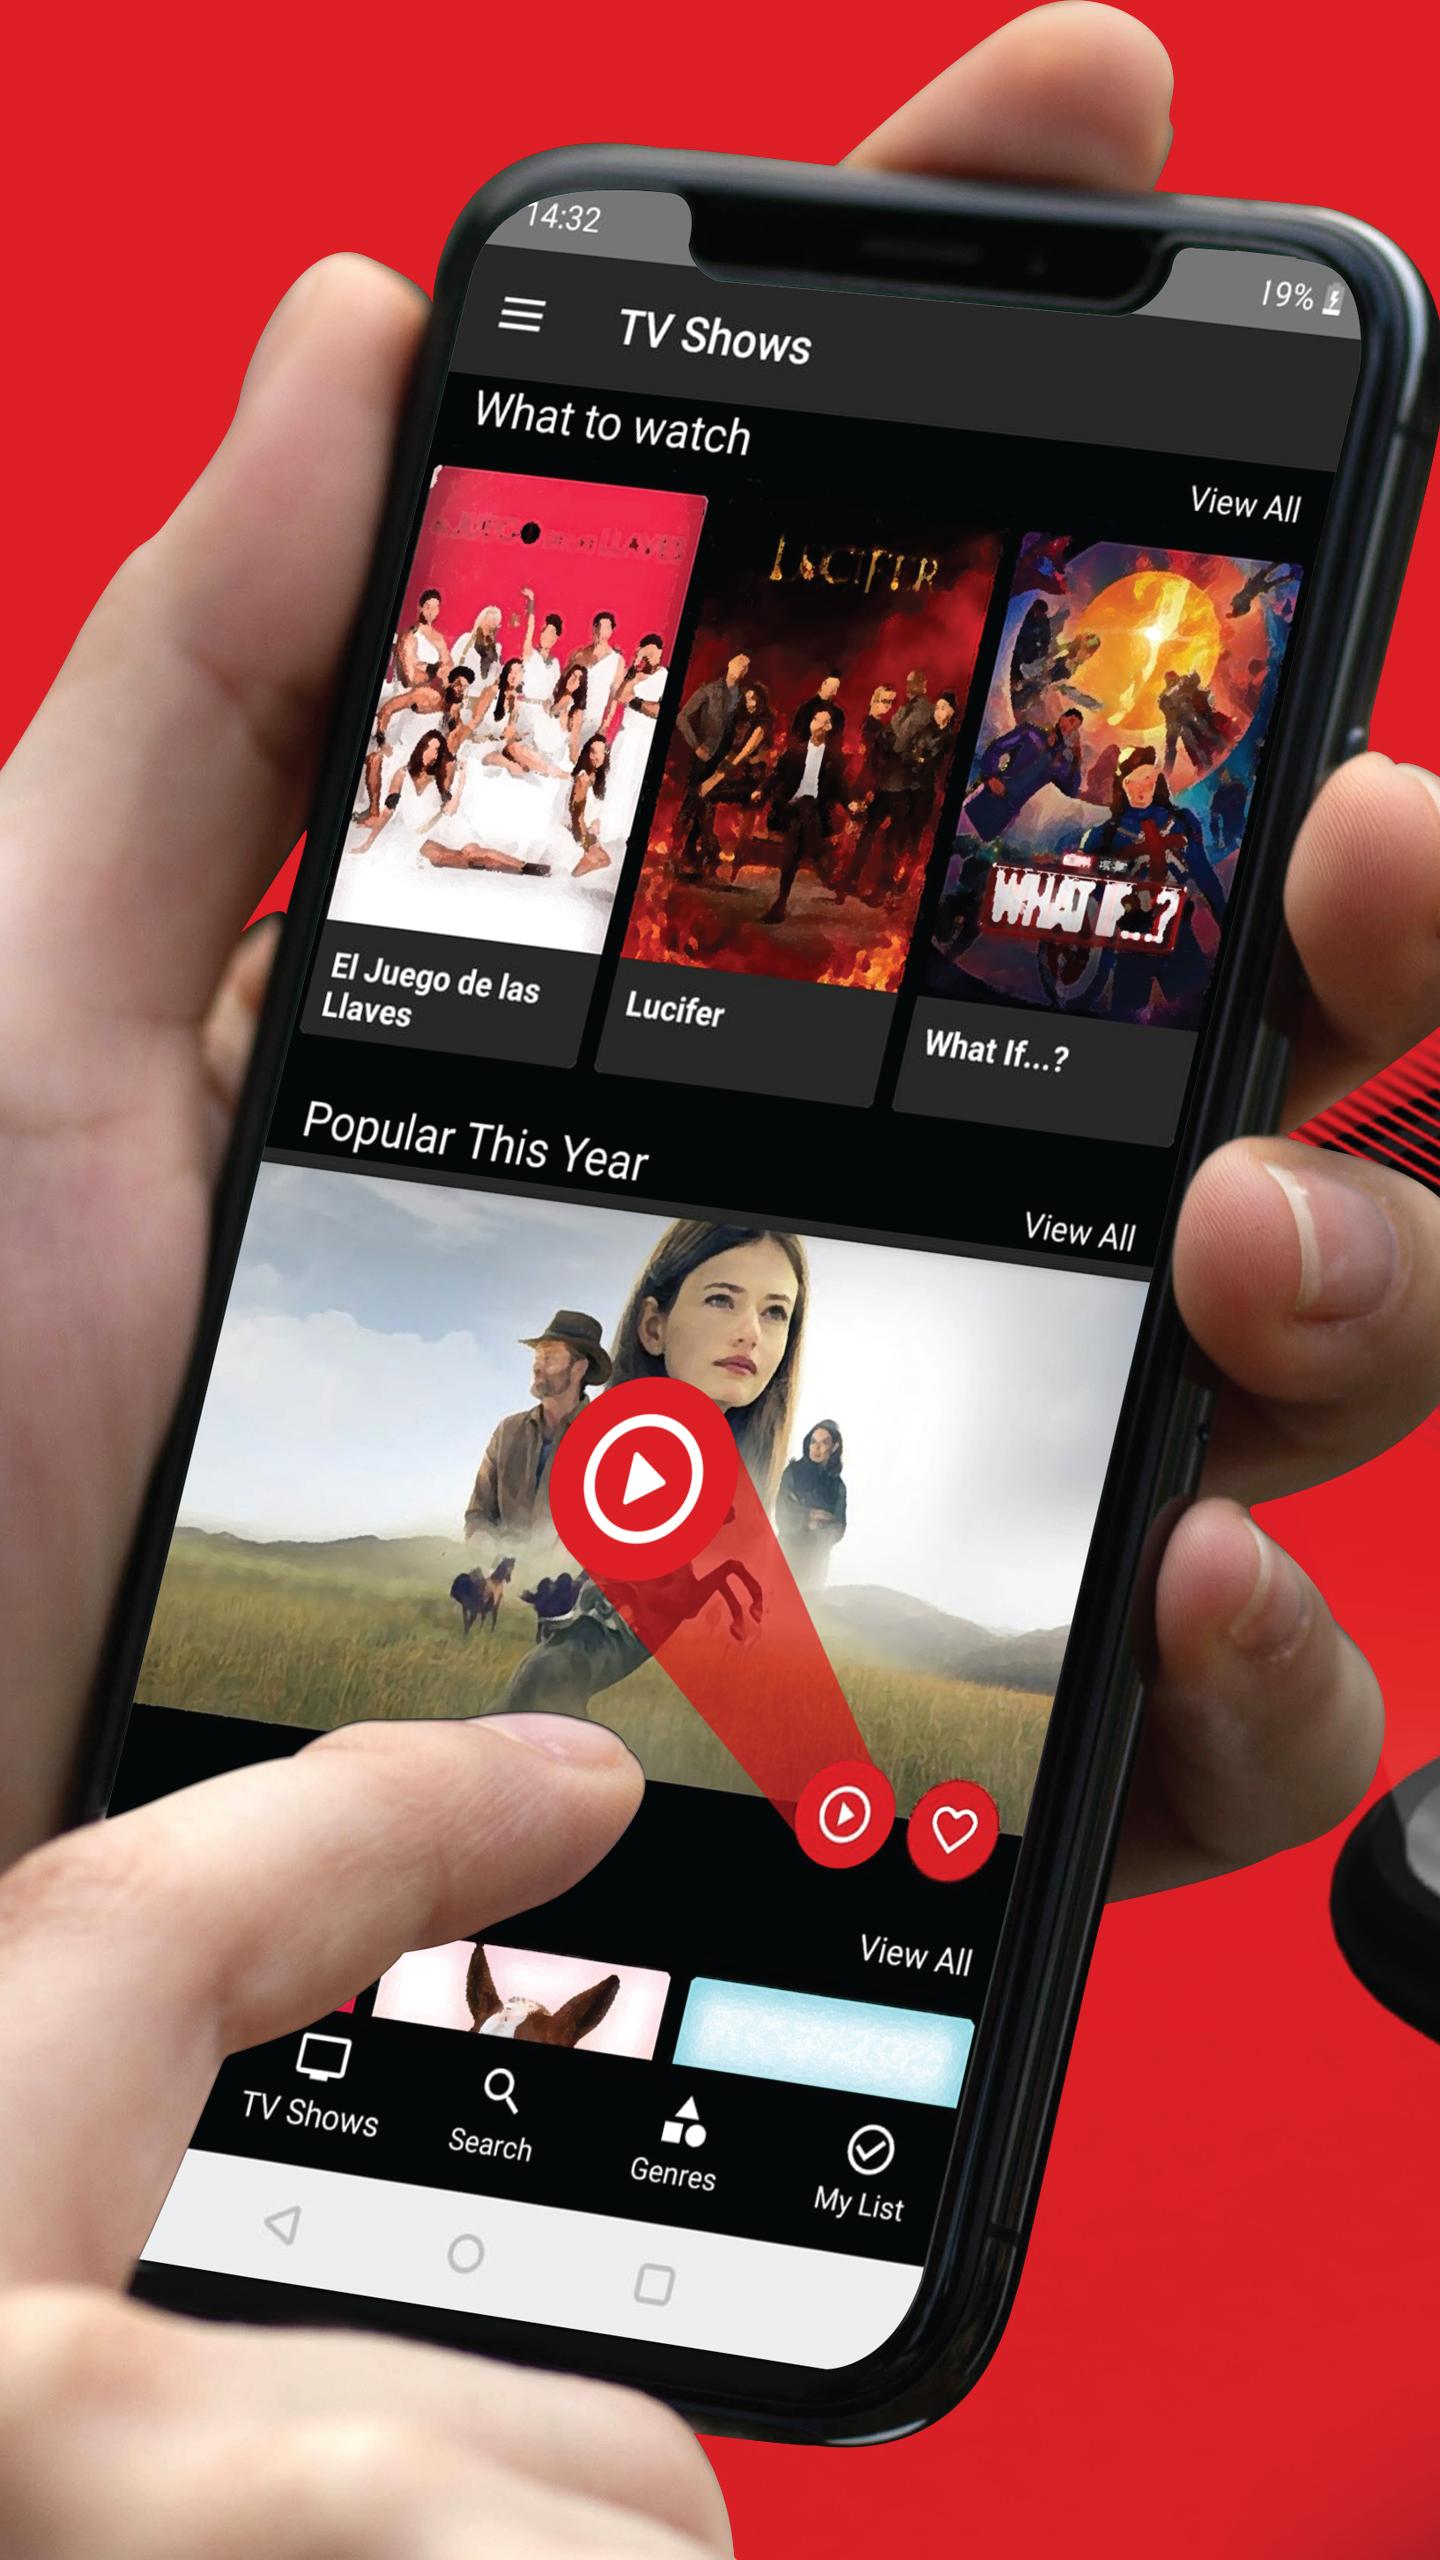 Android show. Moviesjoy. Android show movie. Video show APK poster.